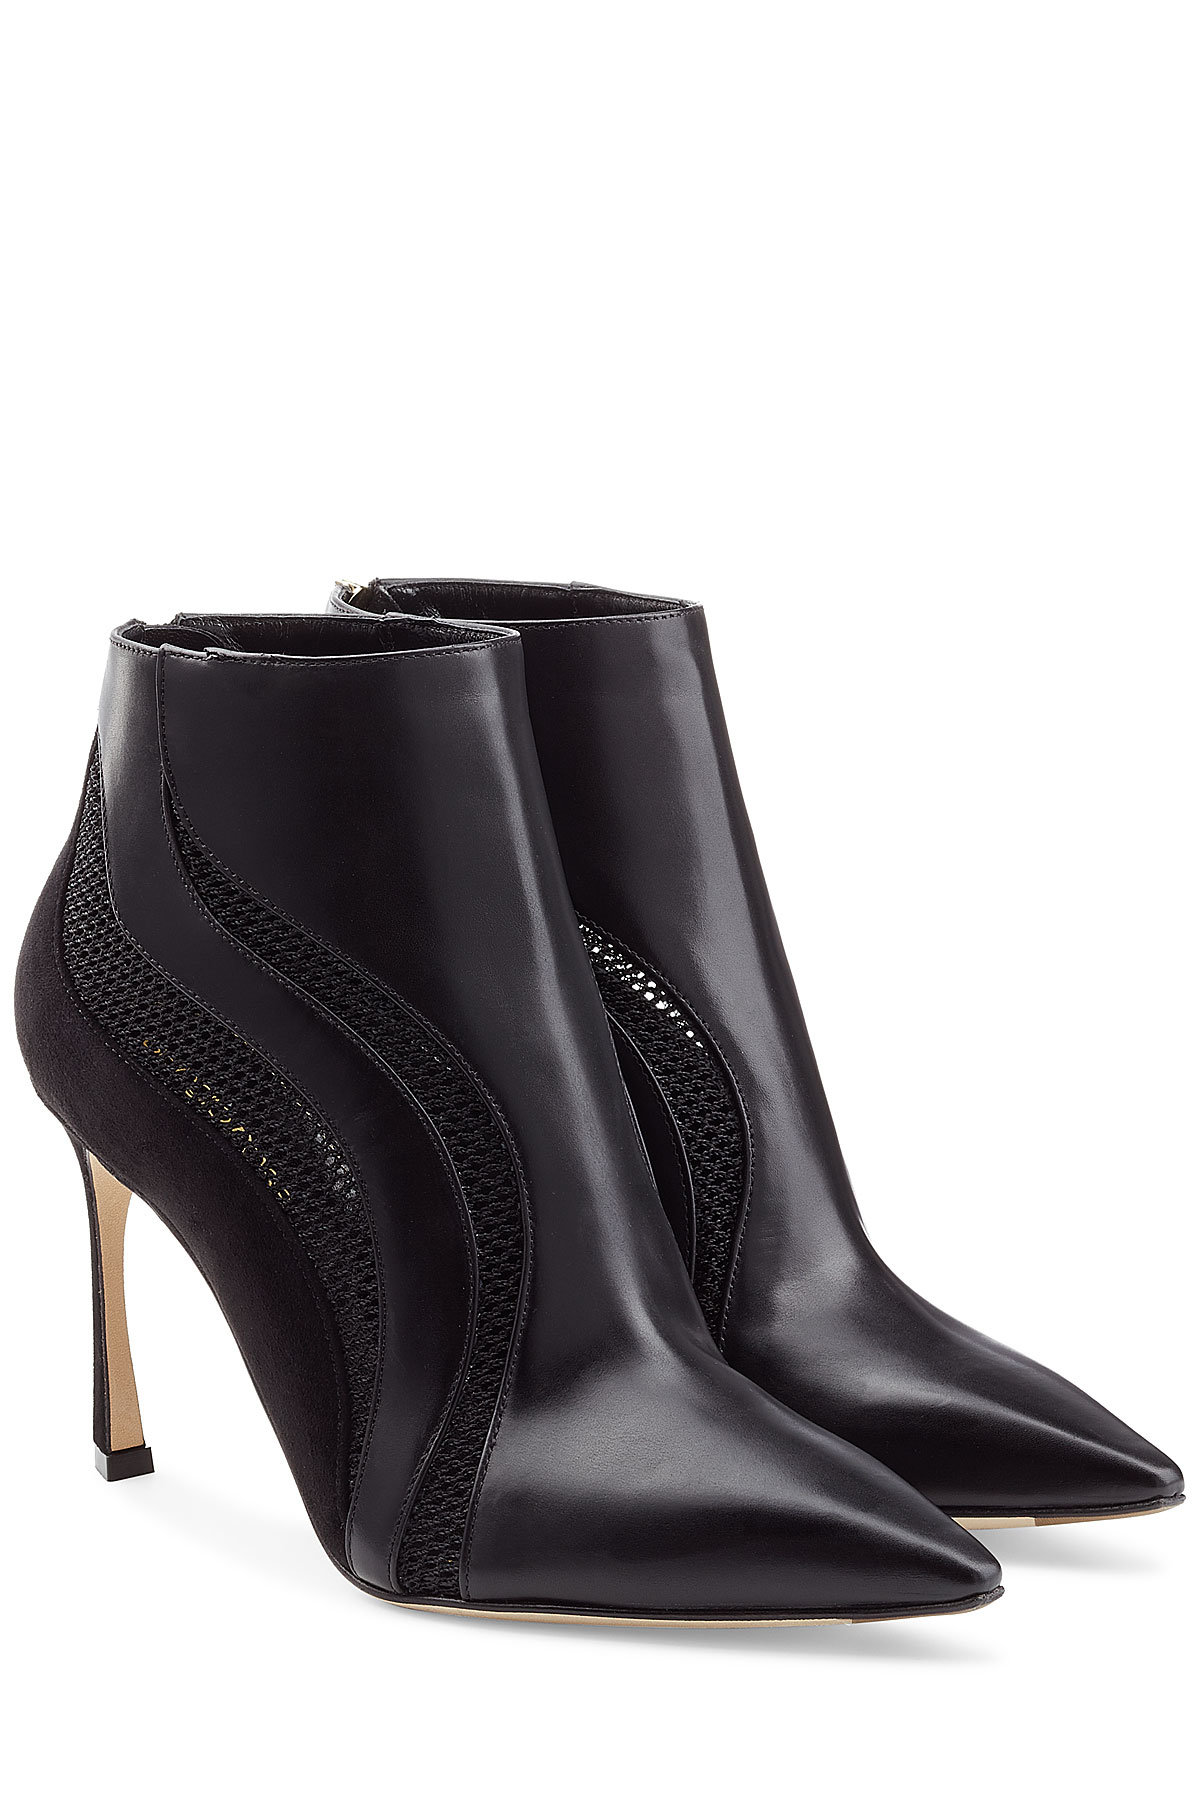 Sergio Rossi - Leather, Suede and Mesh Booties